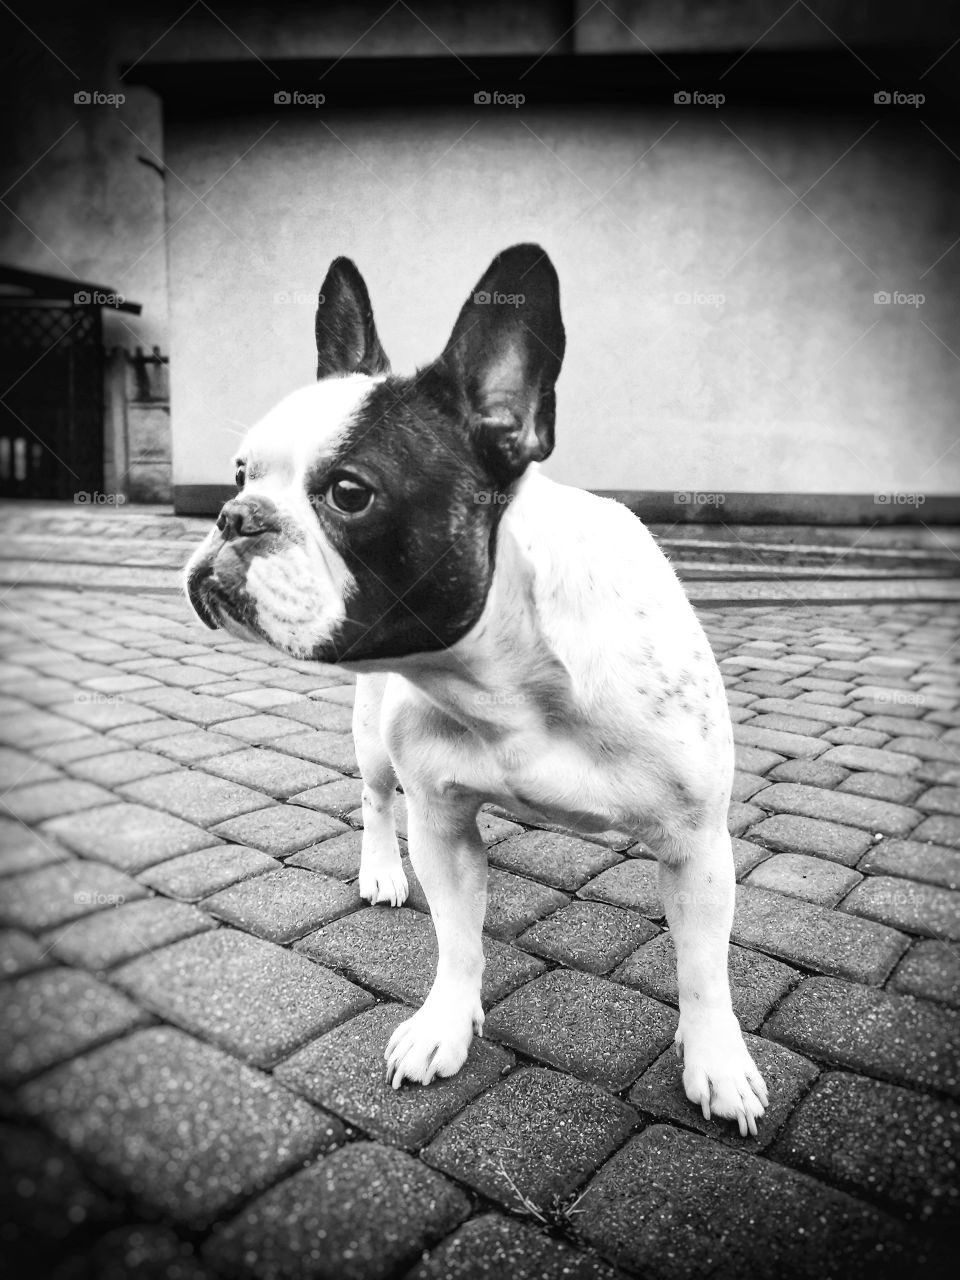 Sophie, the French bulldog